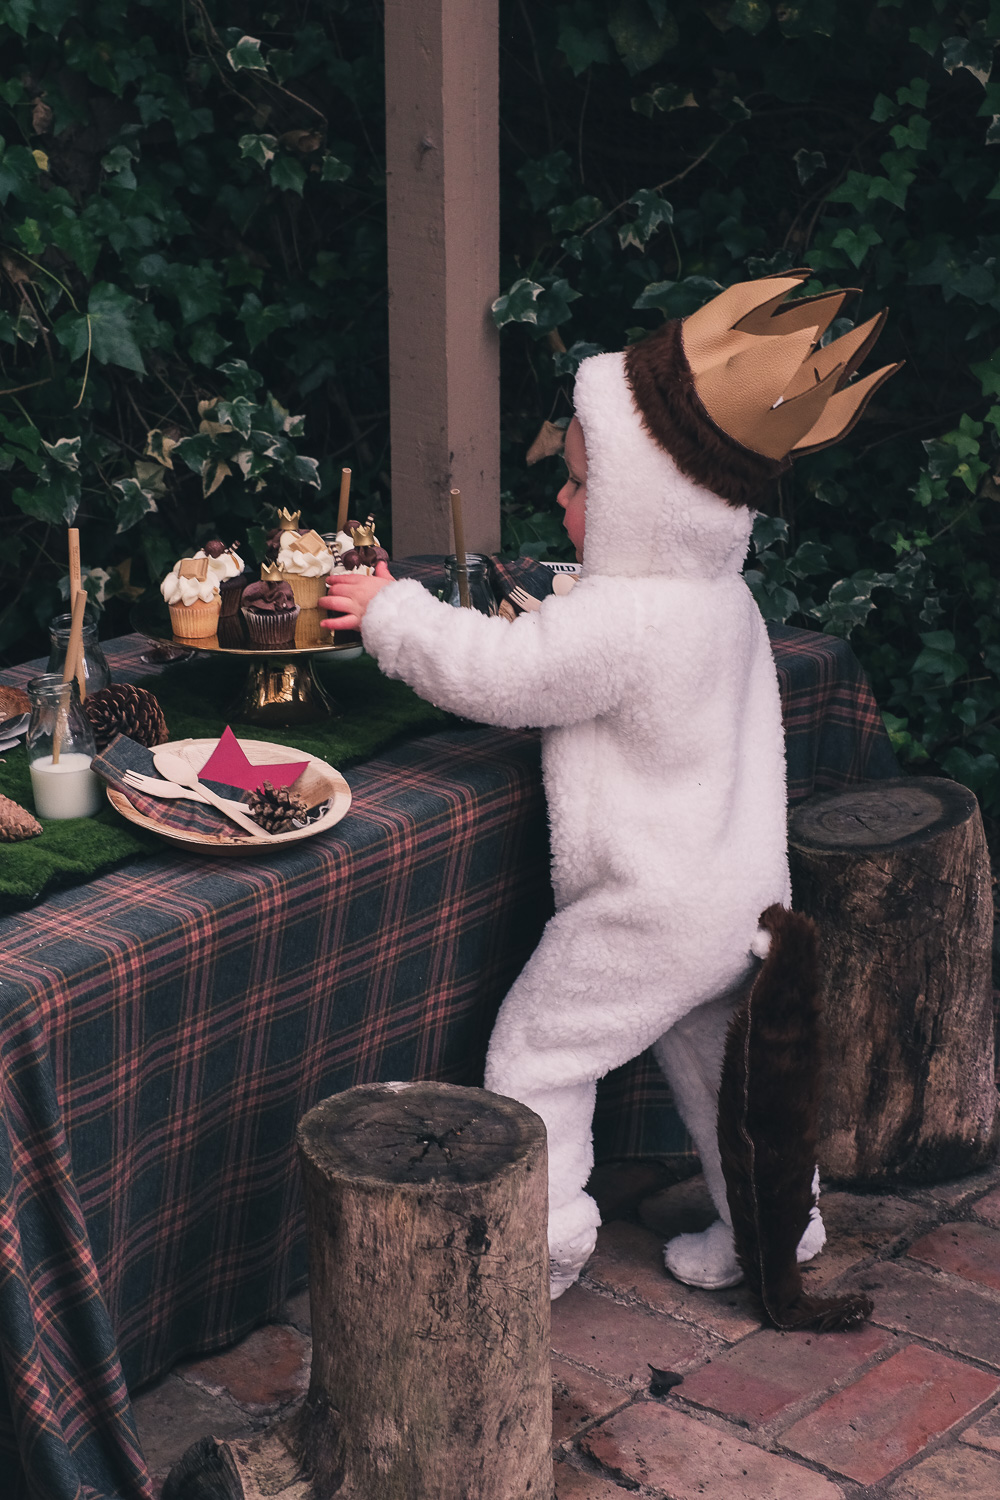 Child wearing Where The Wild Things Are party costume sits at party table